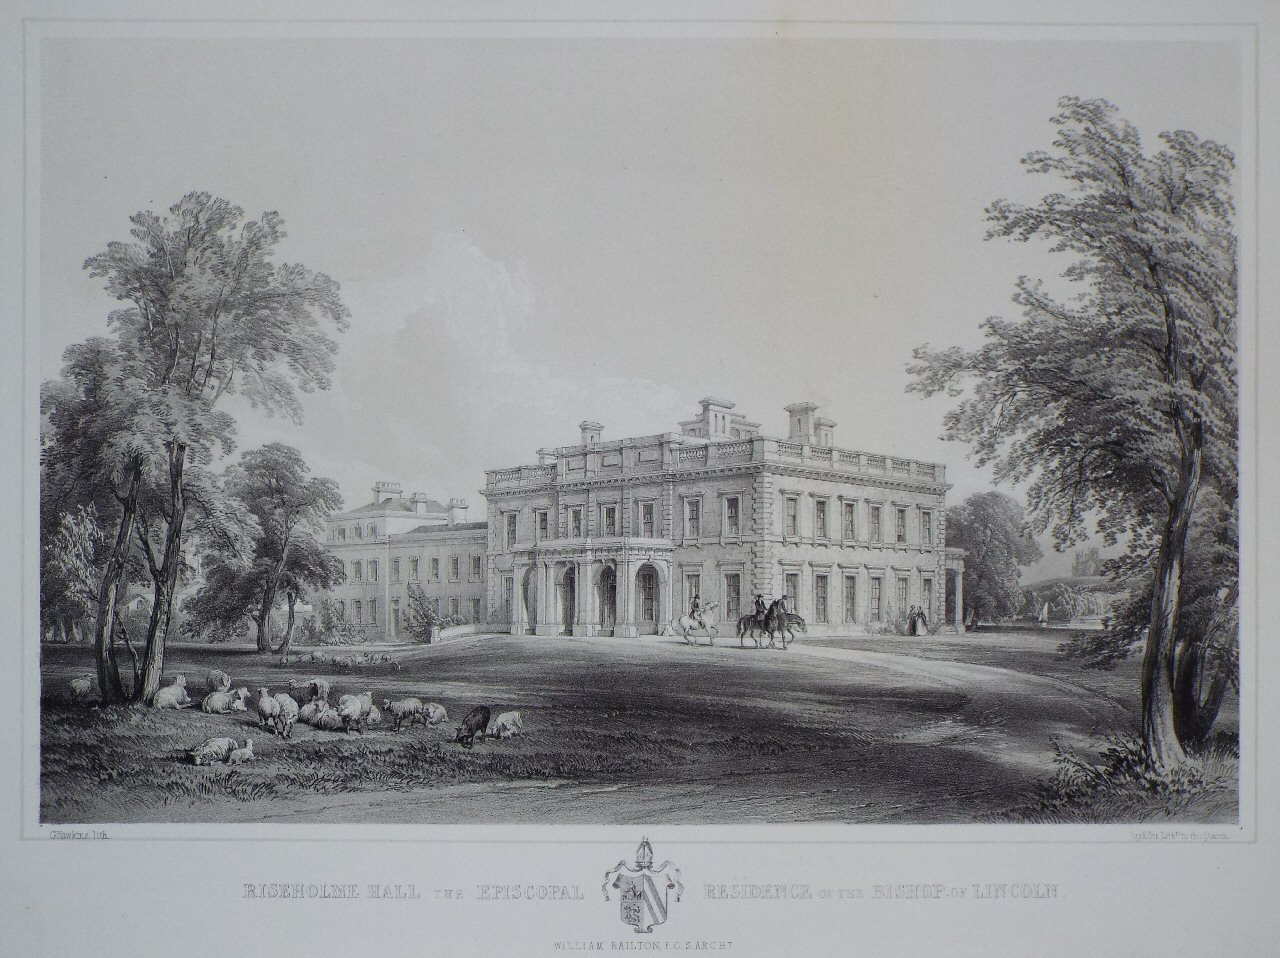 Lithograph - Riseholme Hall, the Episcopal Residence of the Bishop of Lincoln. William Railton Archt. - Hawkins